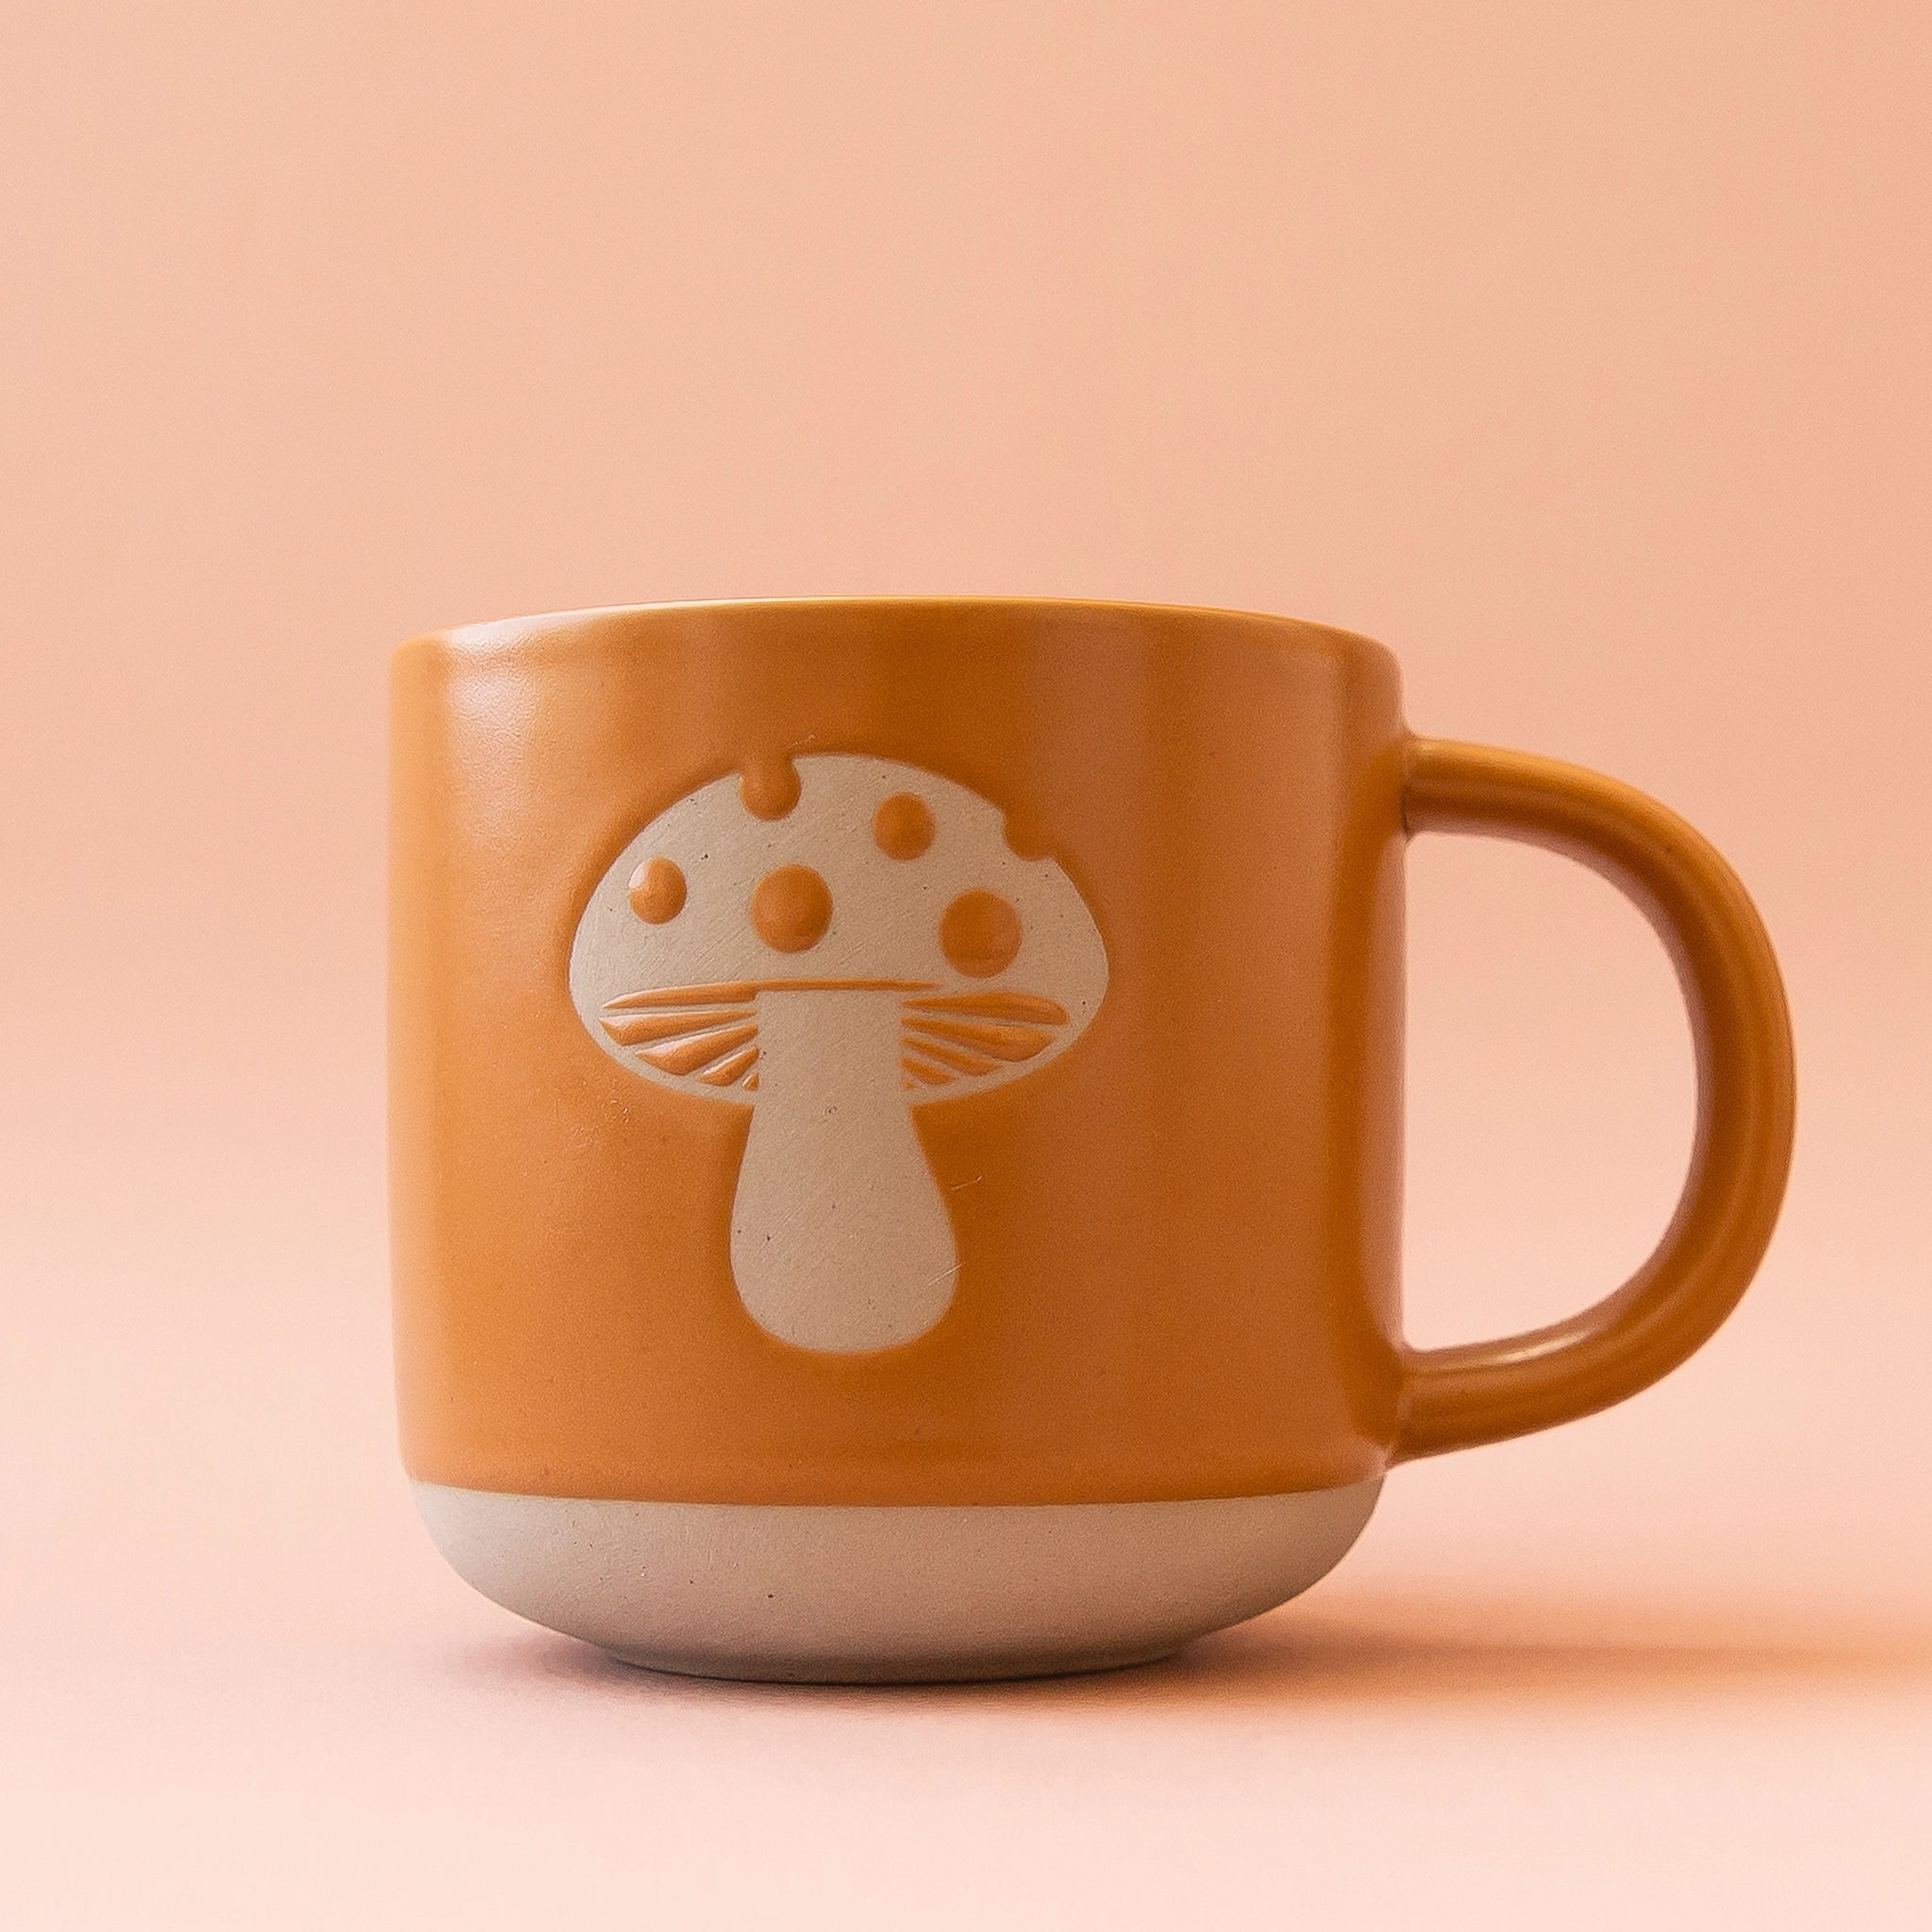 A ceramic mug with a warm brown tone with a mushroom design in the center.